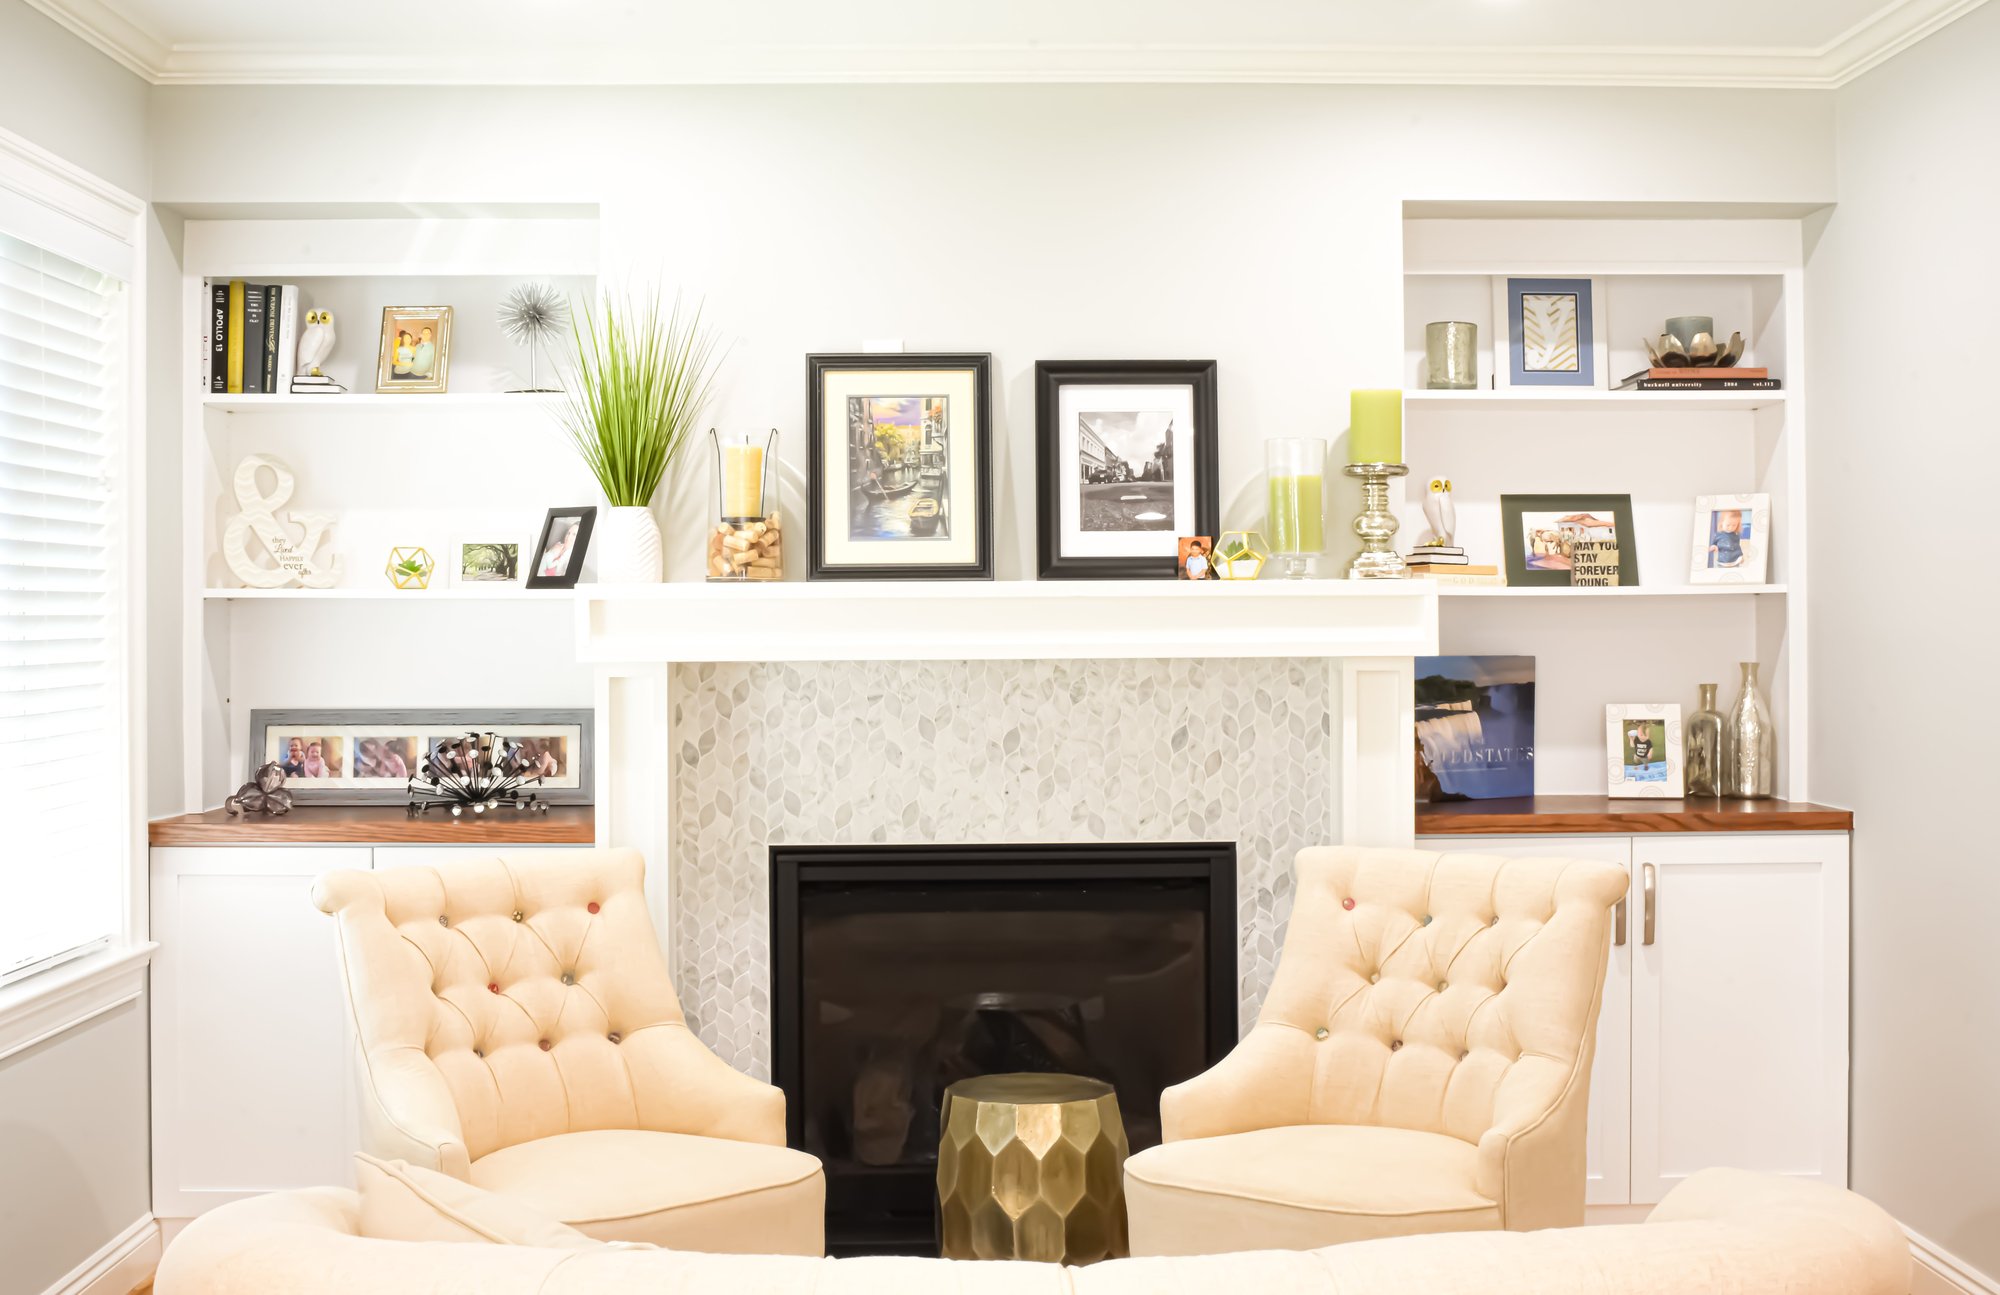 Living room with a fireplace featuring a tiled hearth.  Bookshelves and cabinets frame both sides of the fireplace.  Two cream colored armchairs face away from the fireplace. 